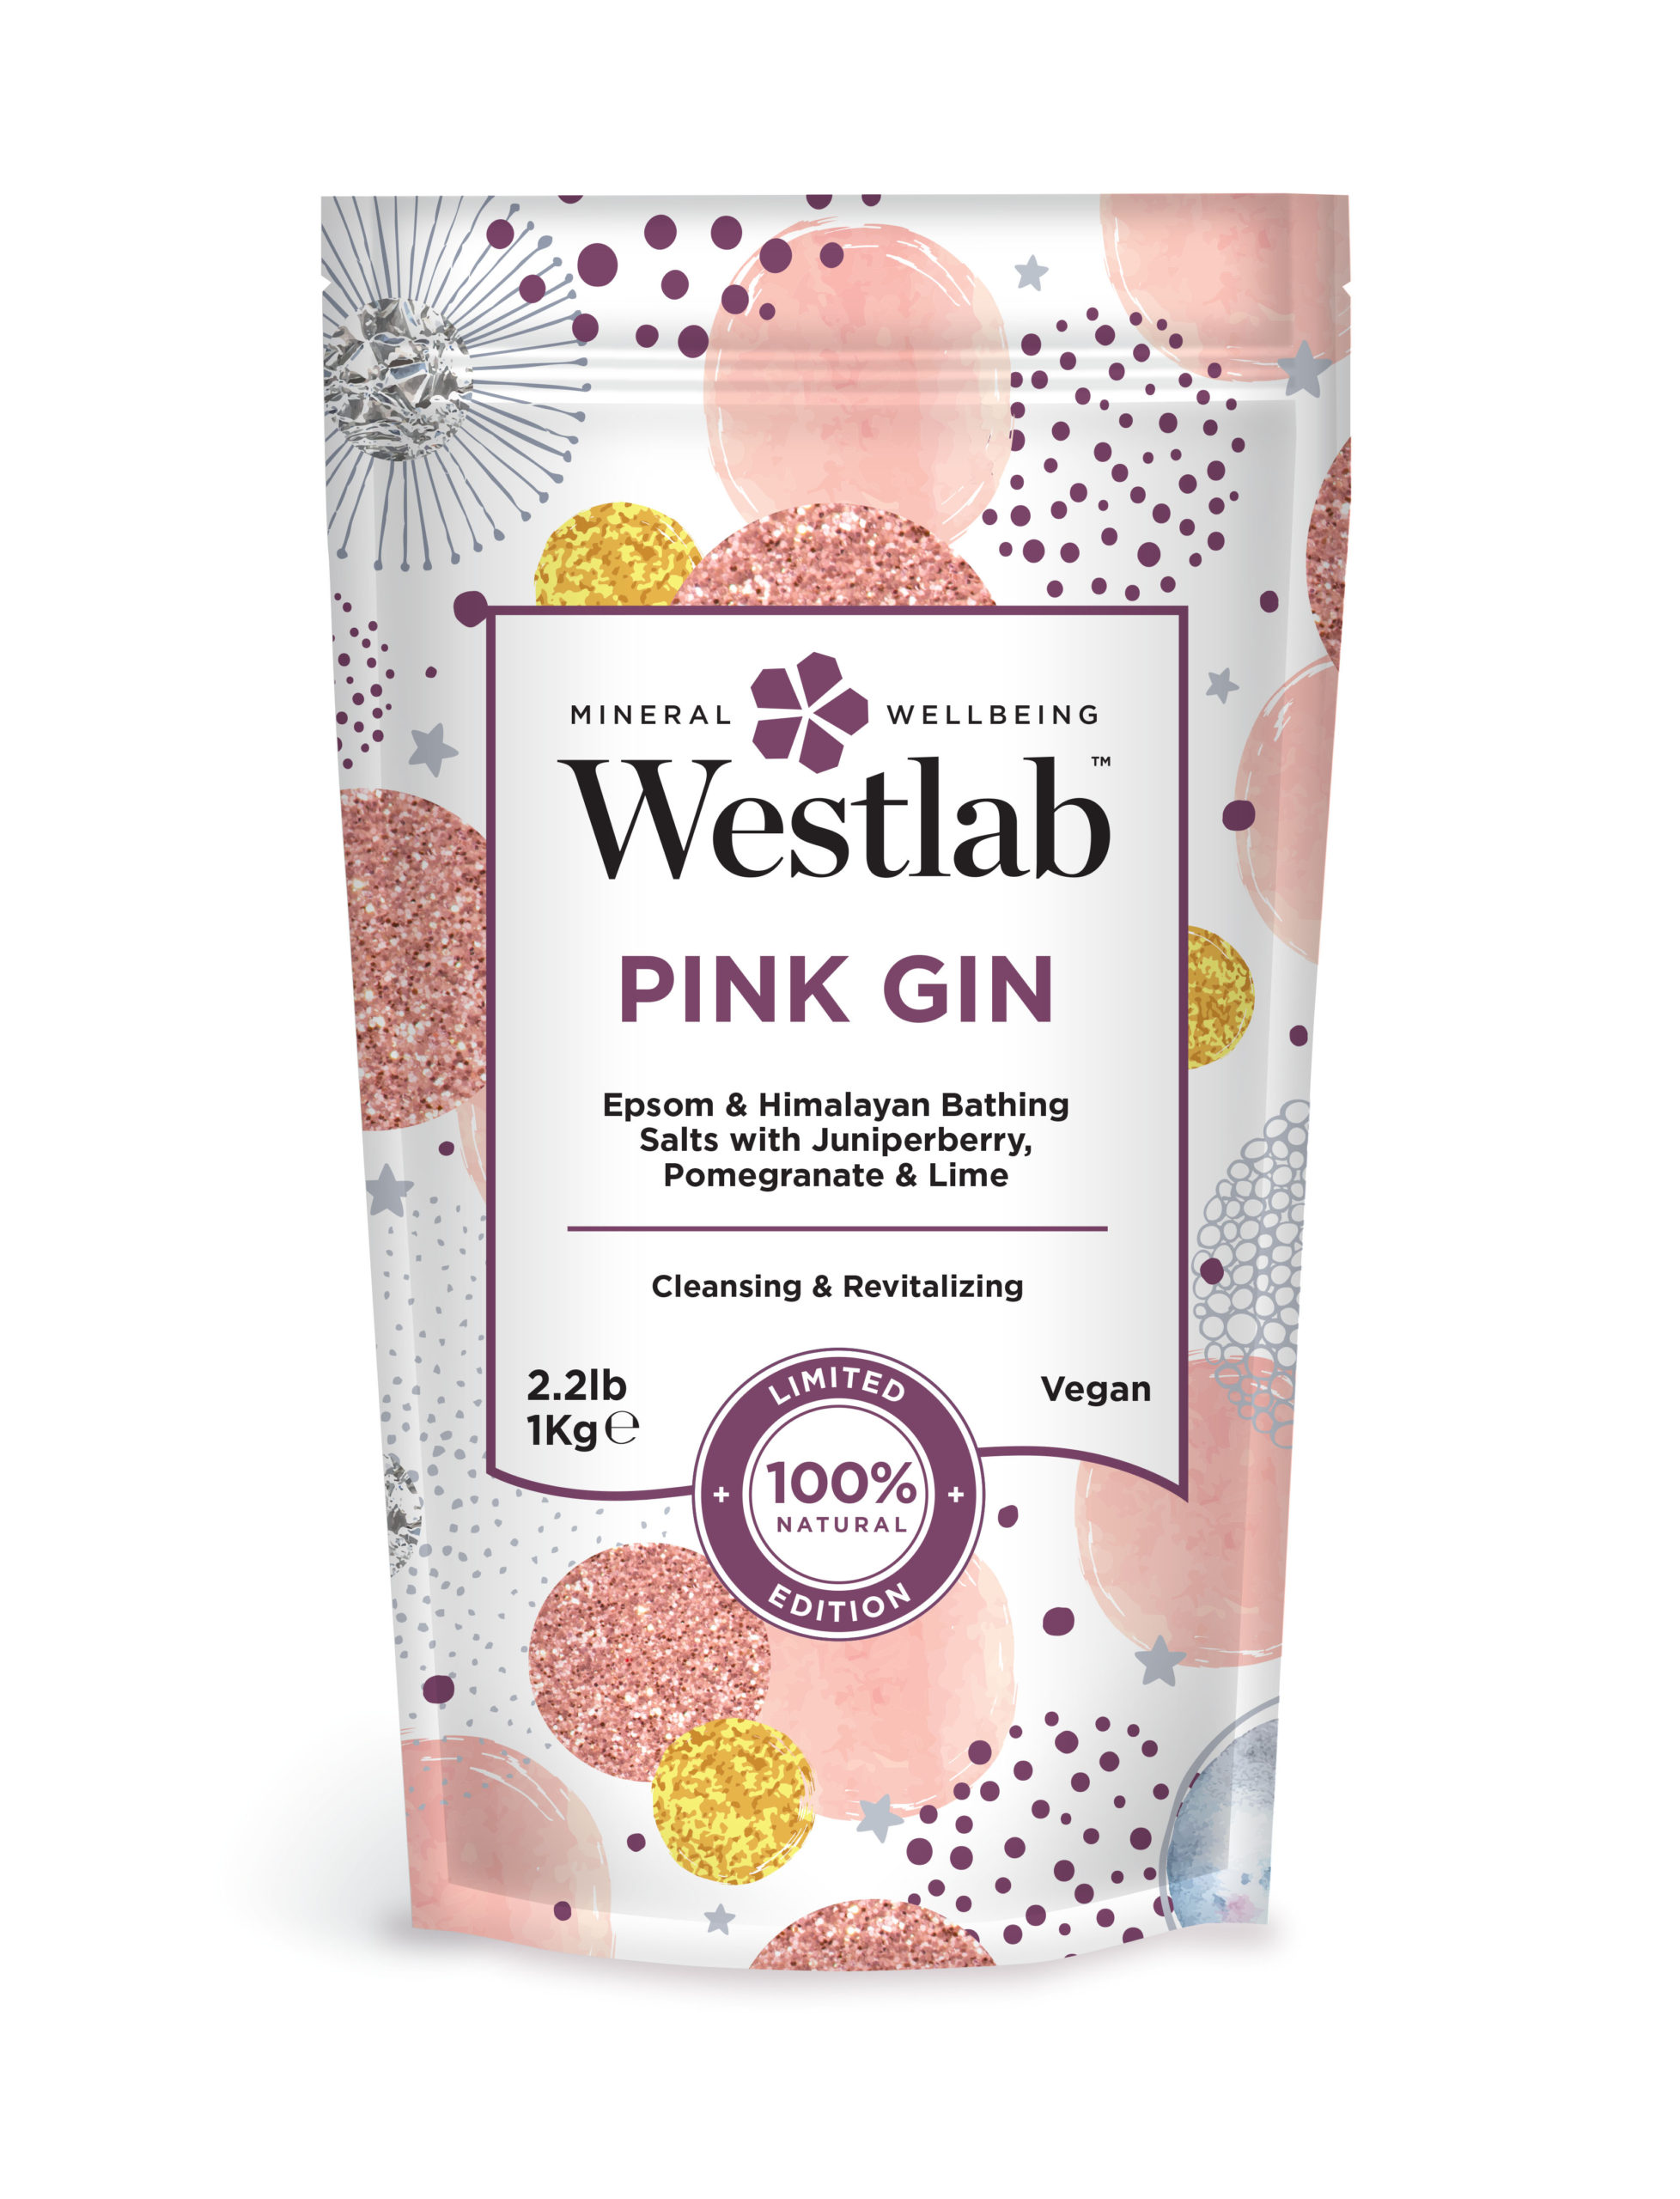 Relax this Galentine's Day with a pink gin salt bath from Westlab